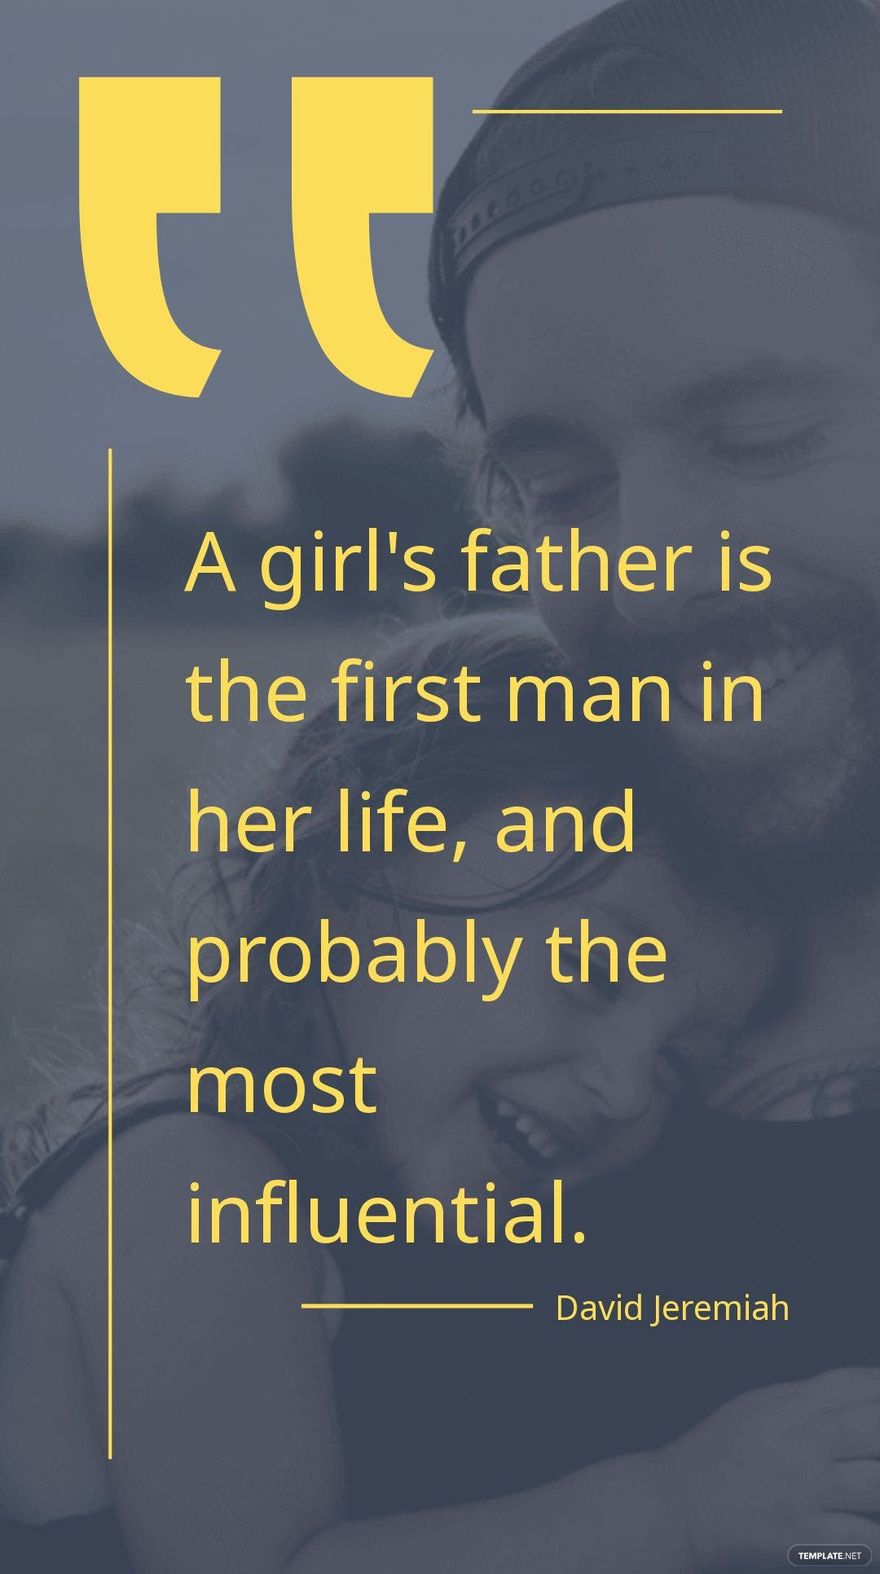 David Jeremiah - A girl's father is the first man in her life, and probably the most influential.